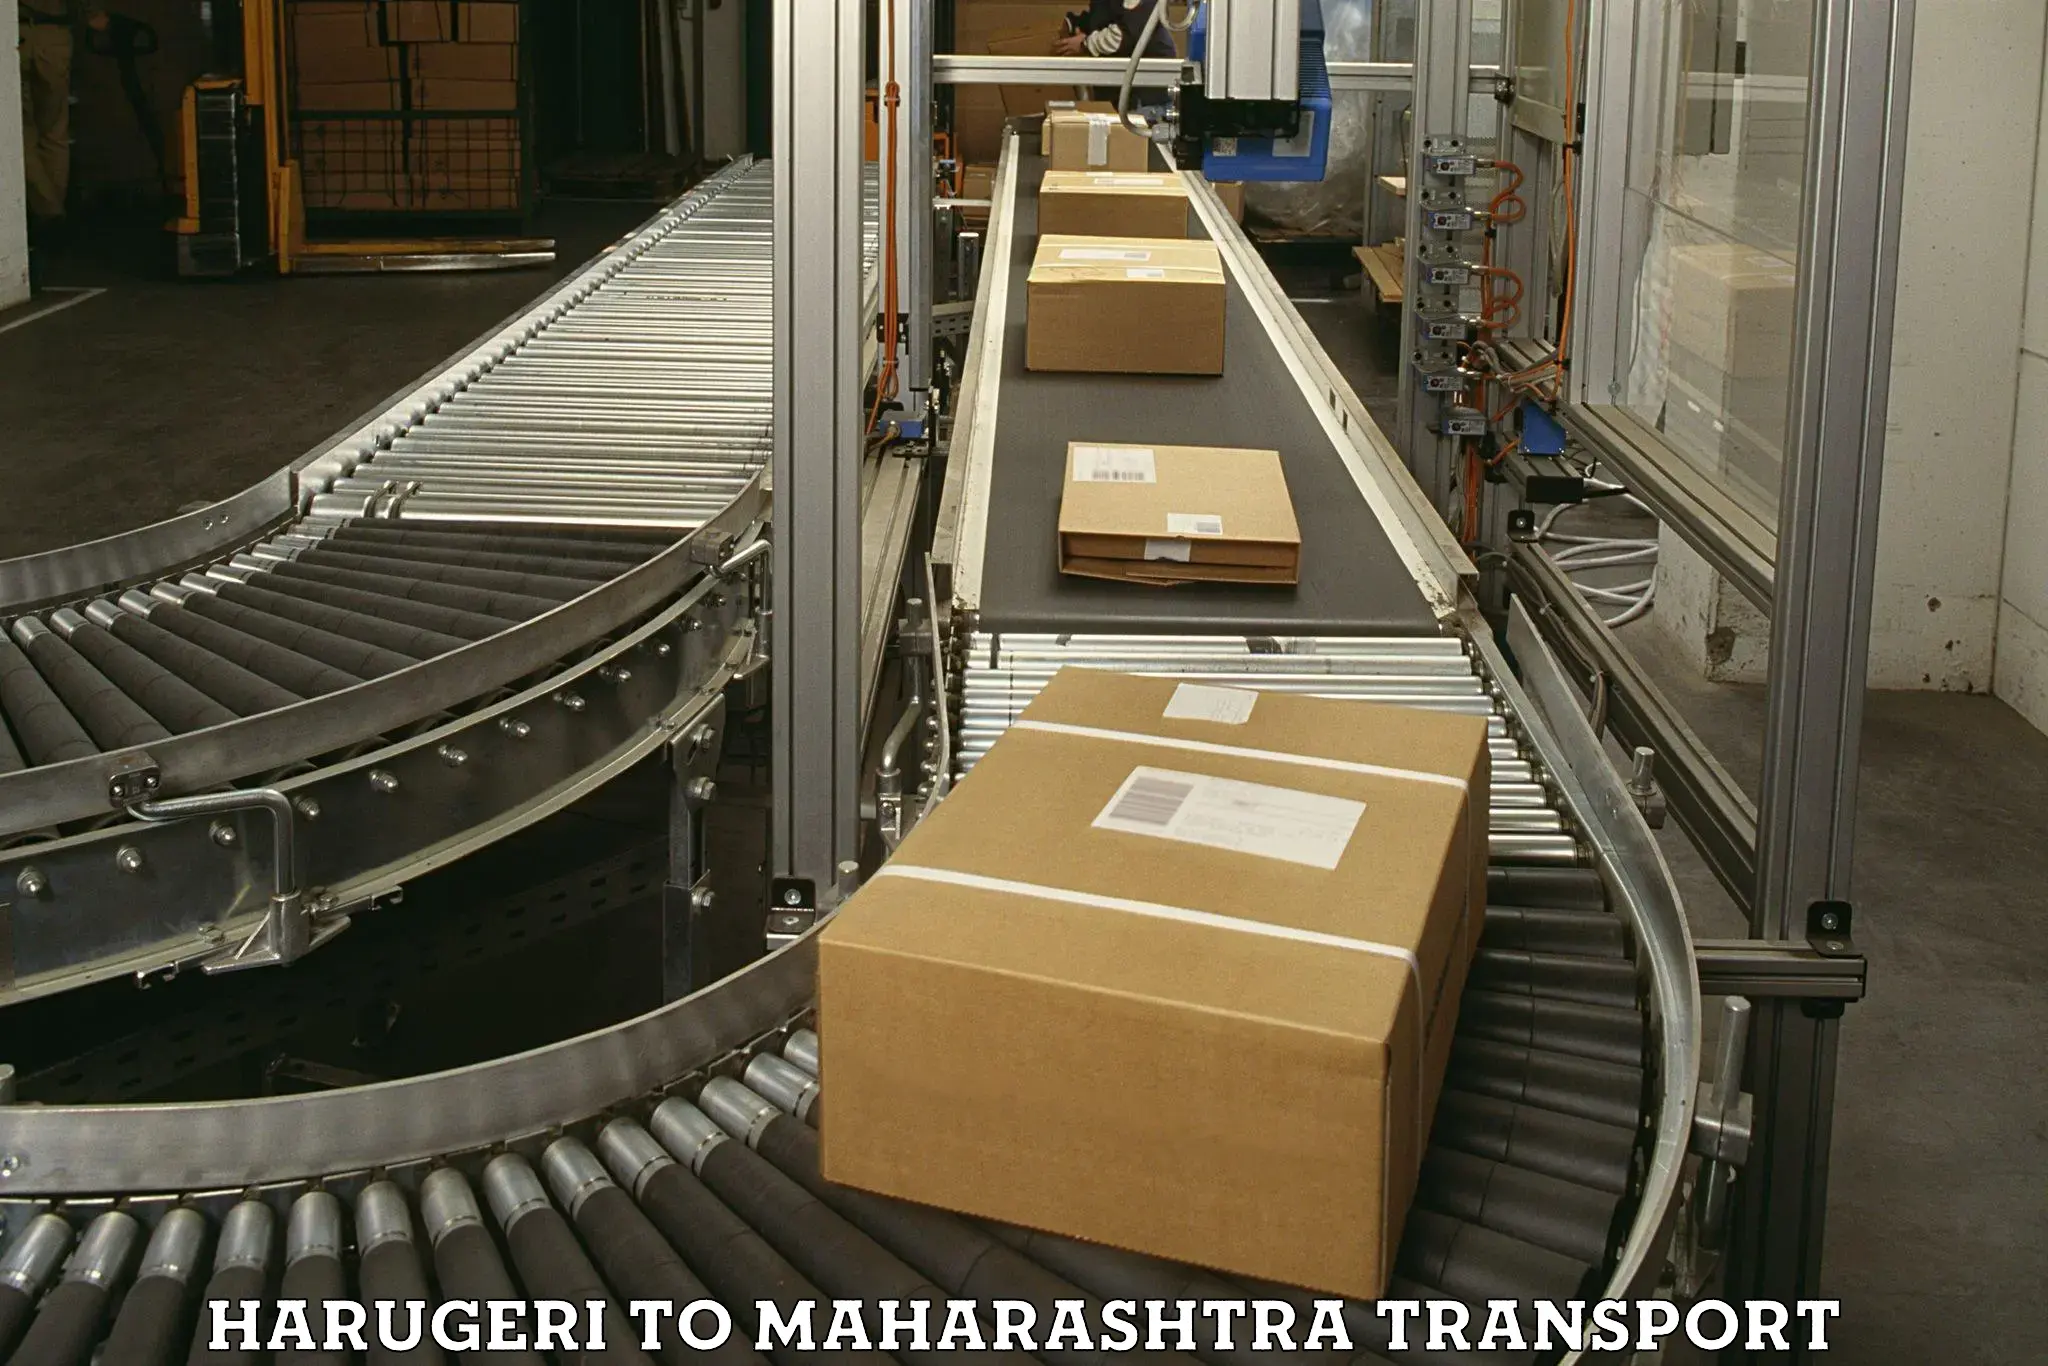 Truck transport companies in India Harugeri to Chandrapur